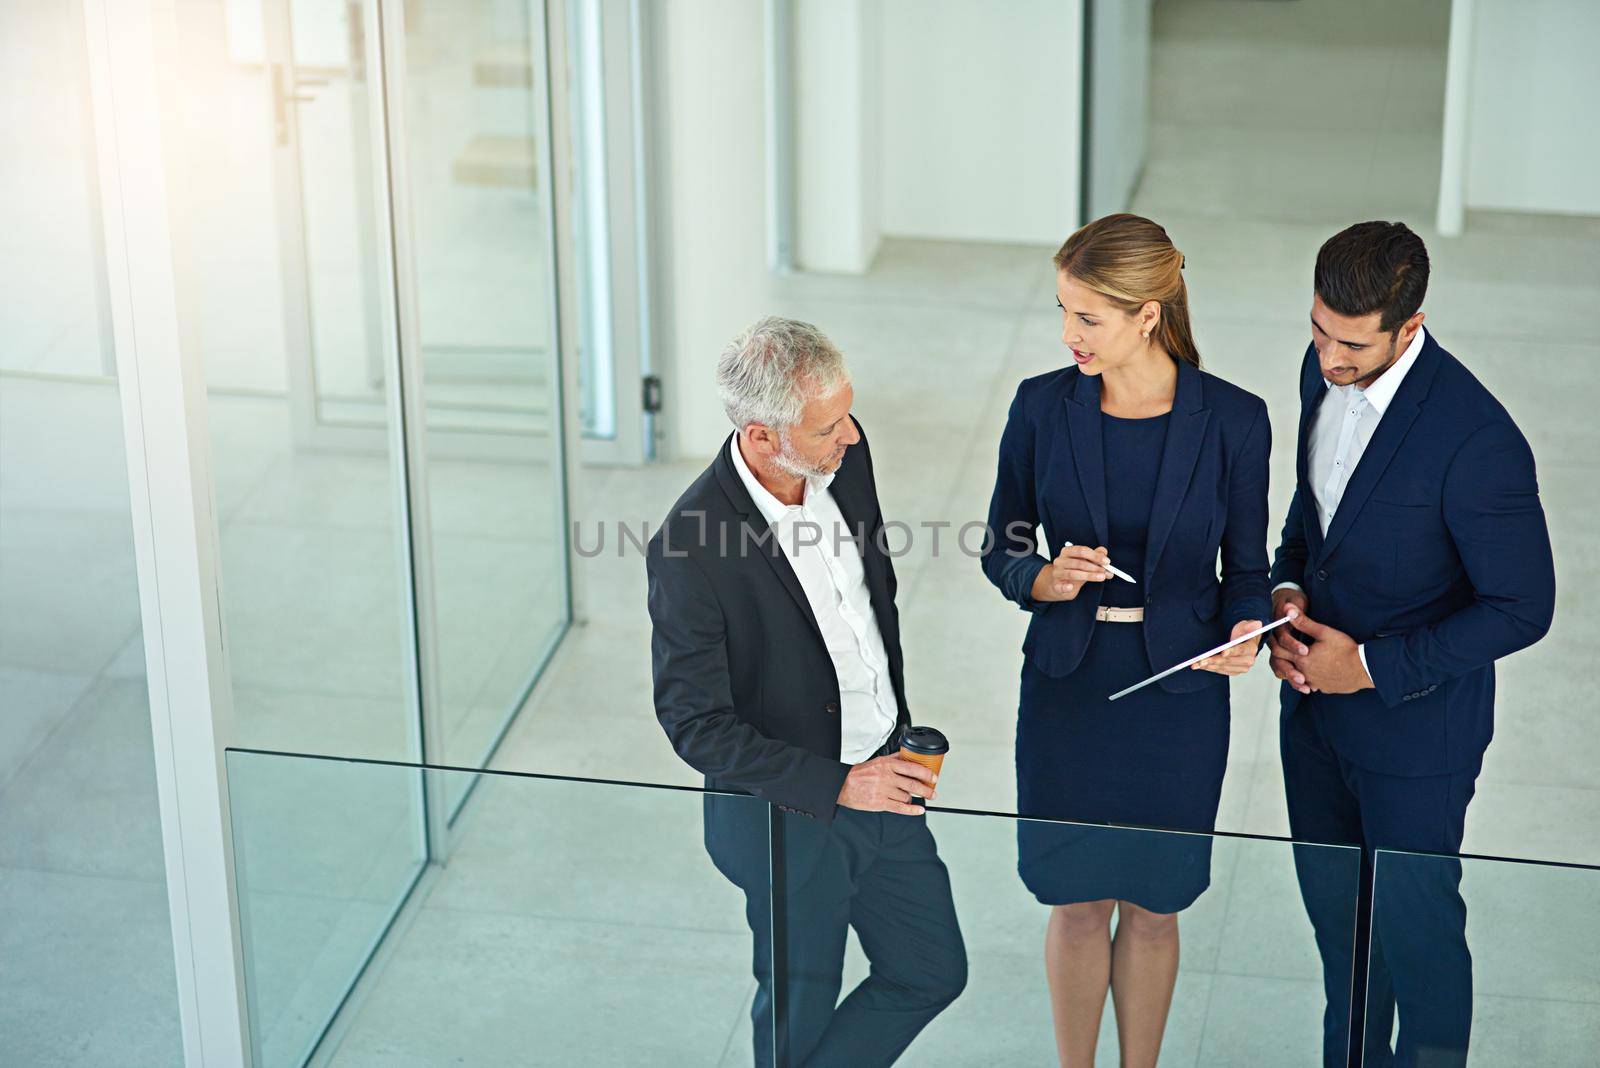 Their decisions take the company forward. three colleagues talking together over a digital tablet while standing in a modern office